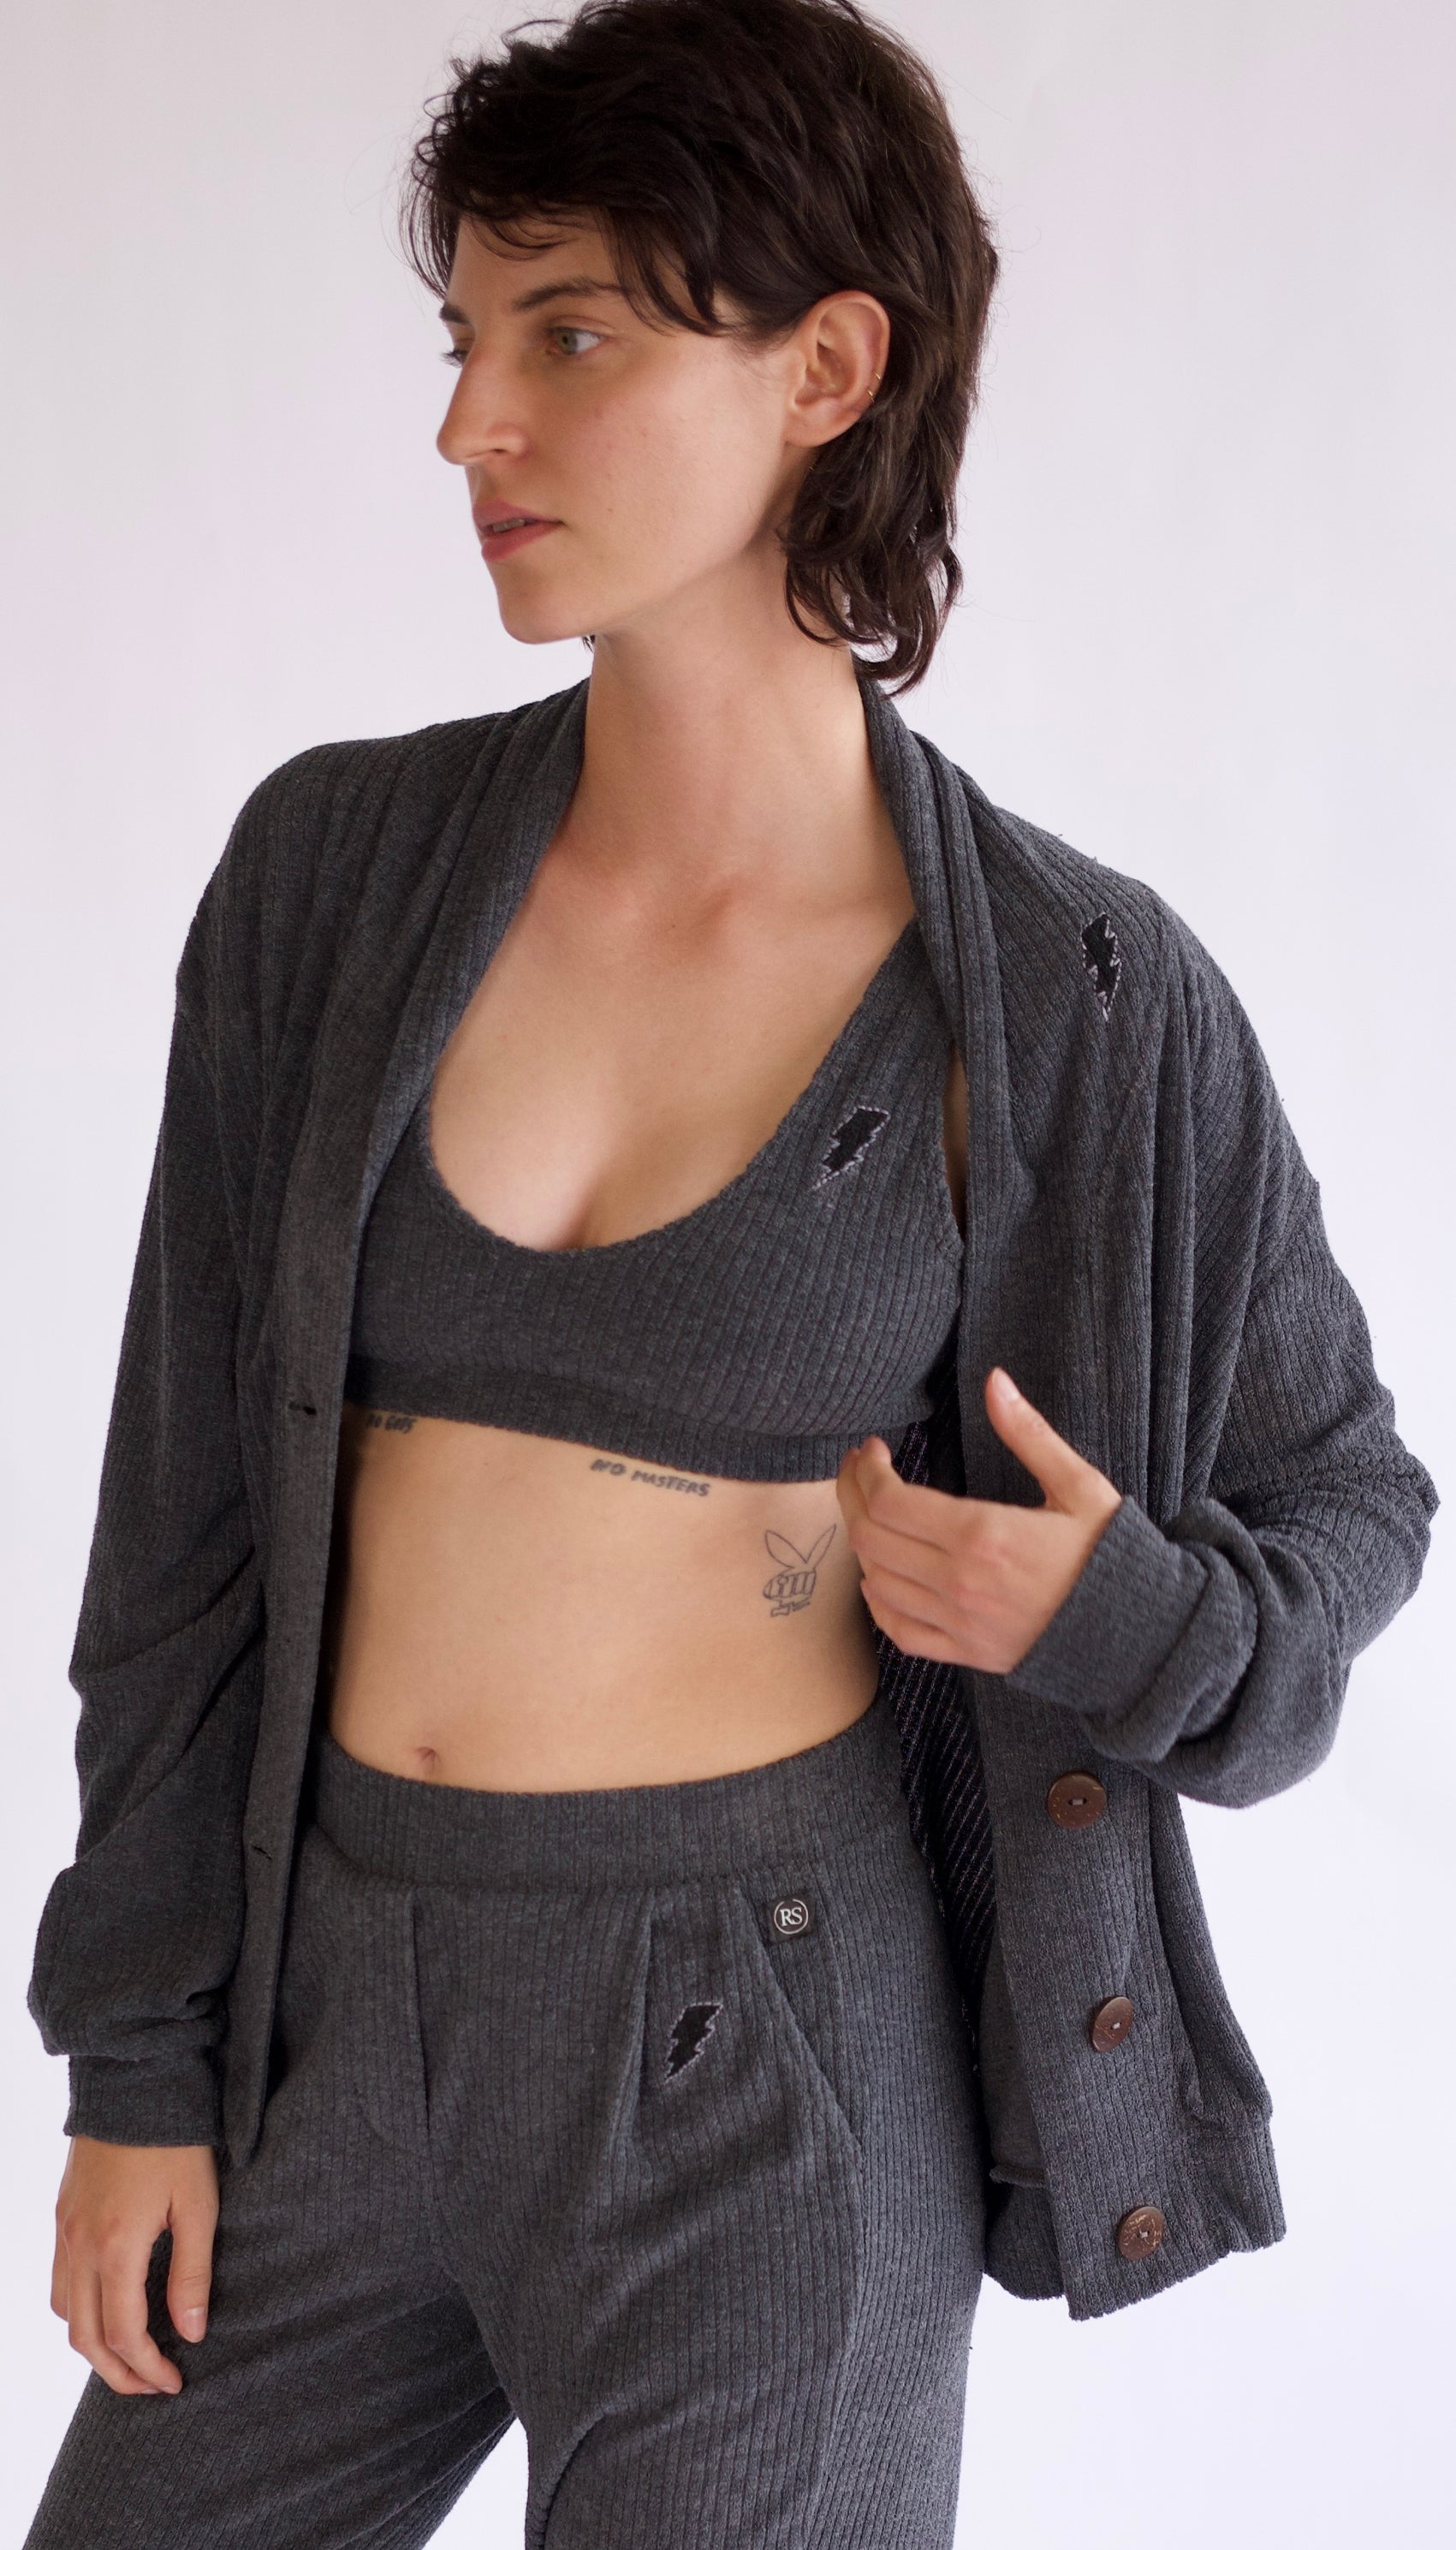 70’s inspired terry drop needle rib cardigan, charcoal dyed in small batches of 4 pieces at a time, each piece is unique. Chic yet uber comfy!